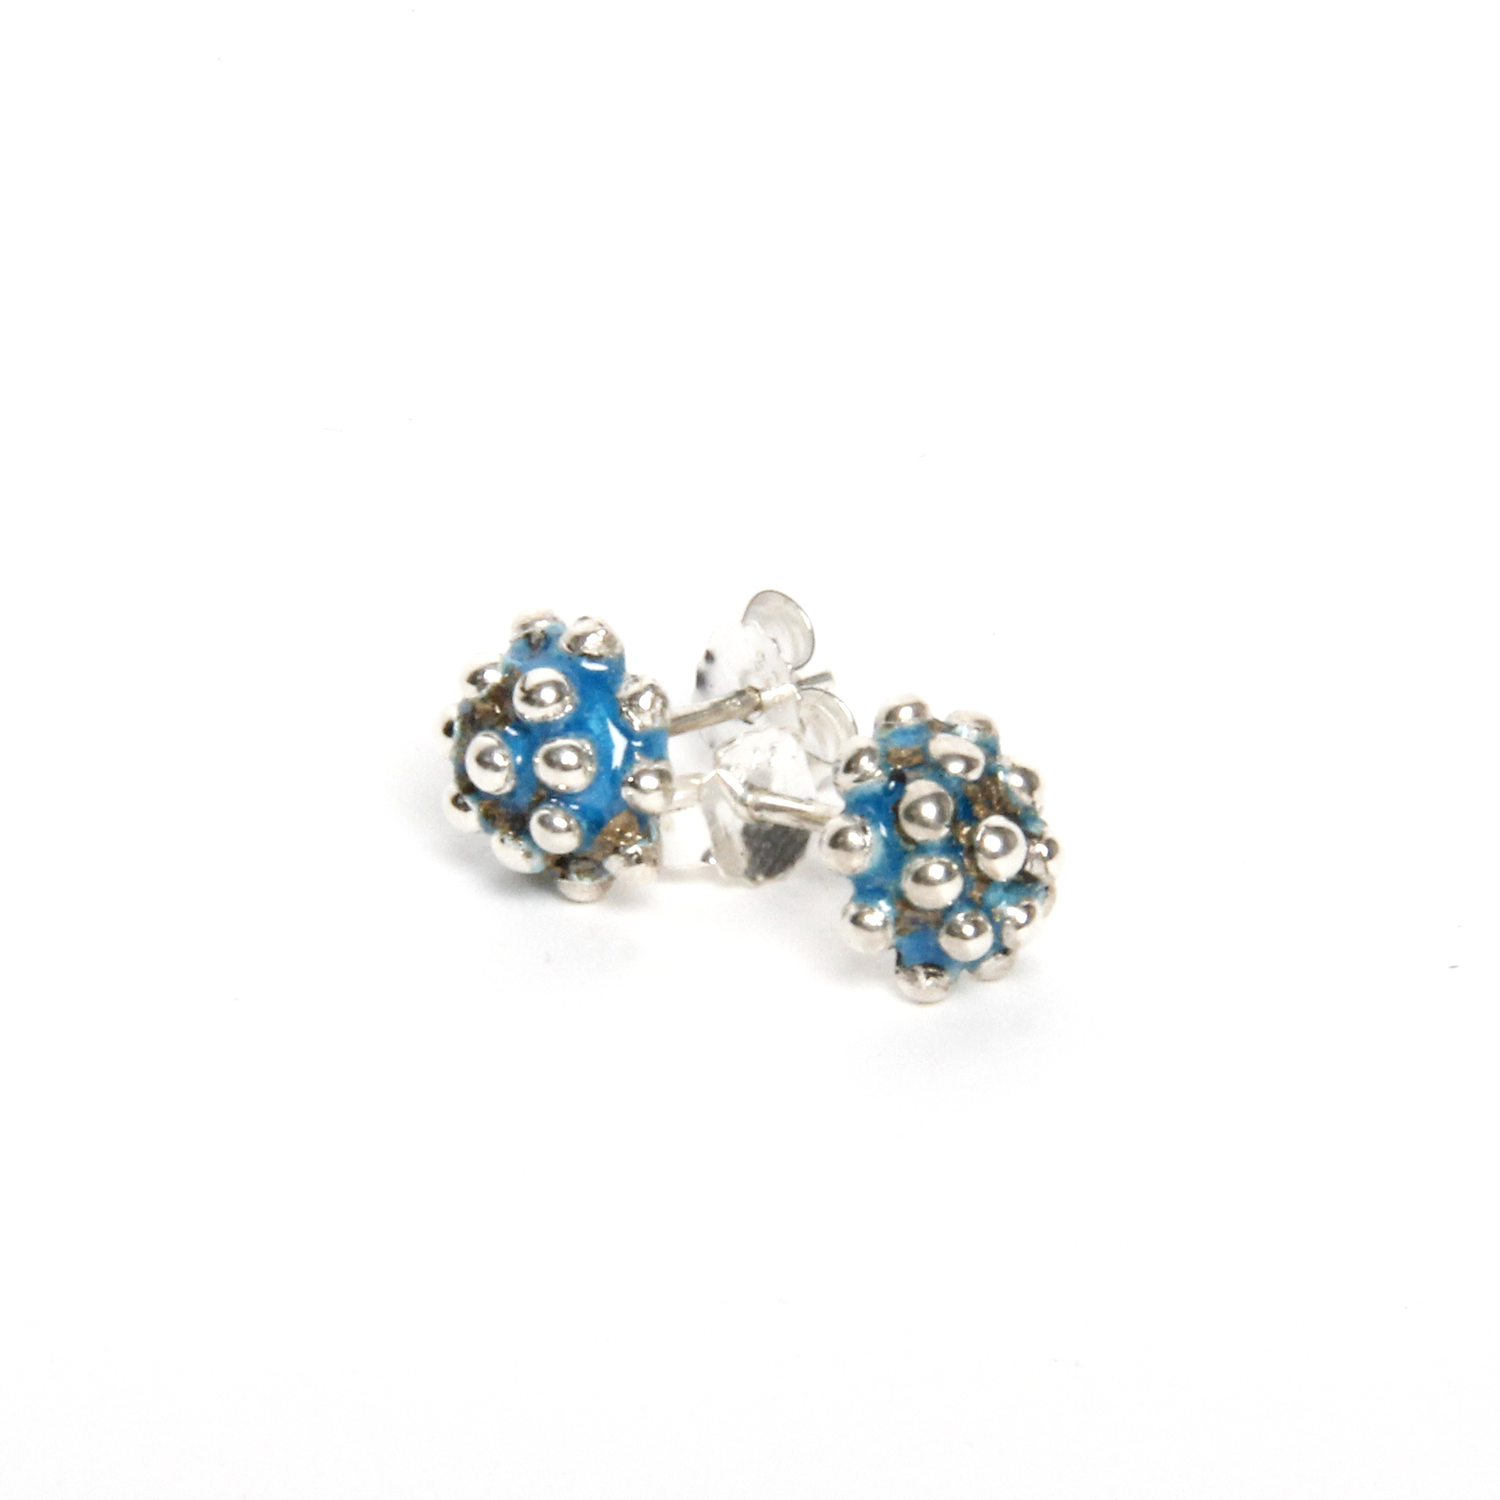 Cinelli Maillet: Mini Blowfish Earrings in Turquoise Product Image 1 of 2